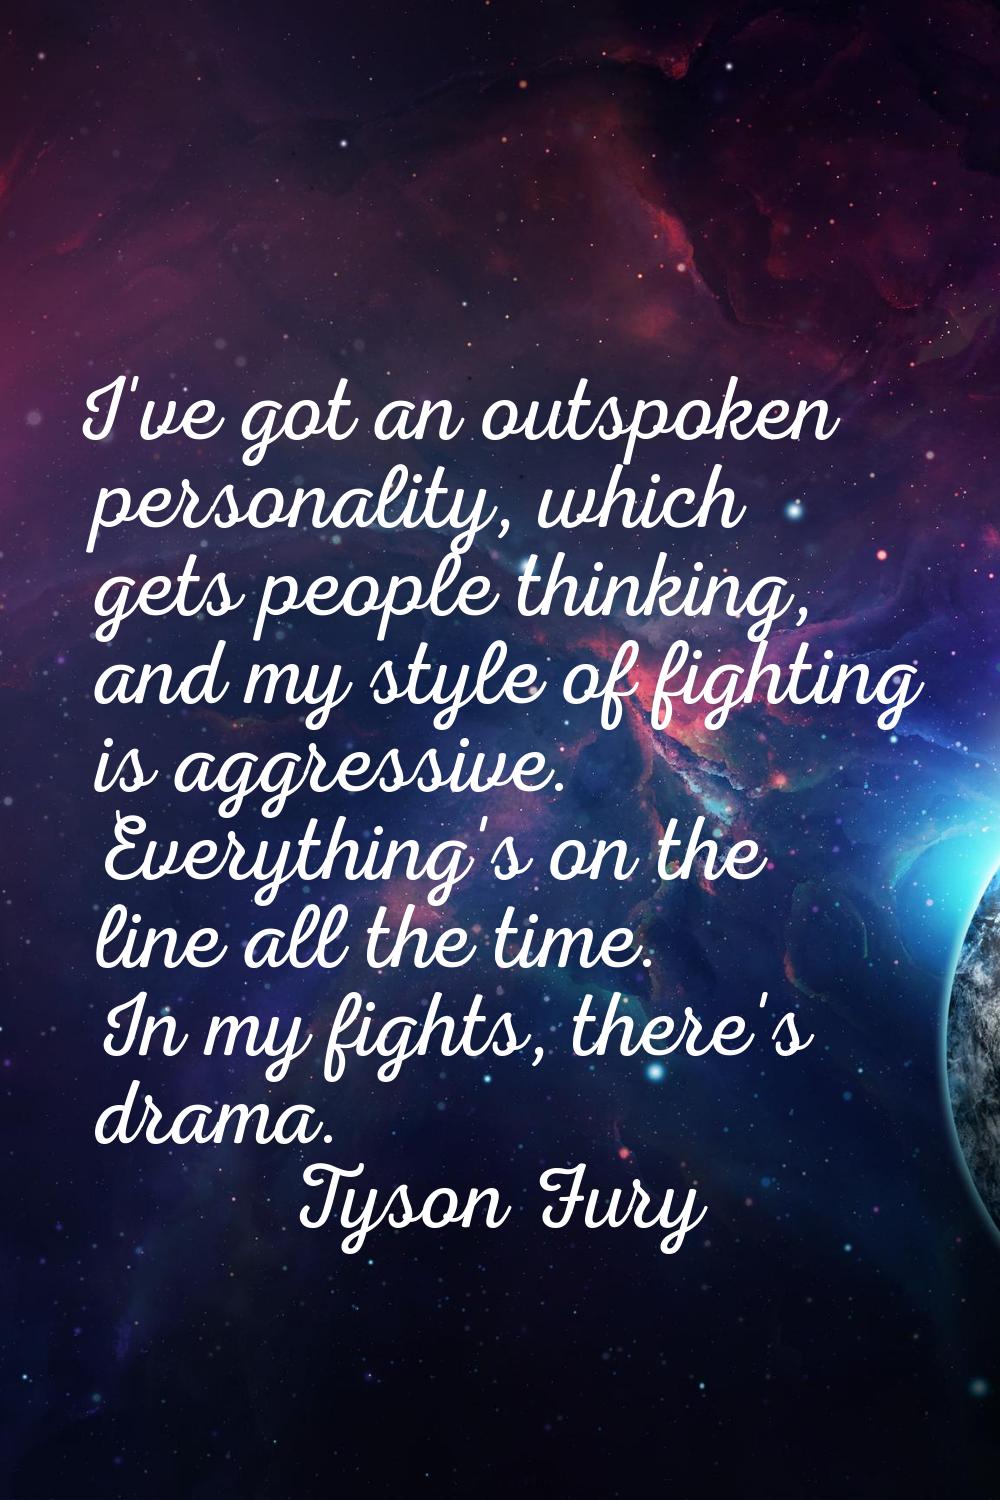 I've got an outspoken personality, which gets people thinking, and my style of fighting is aggressi